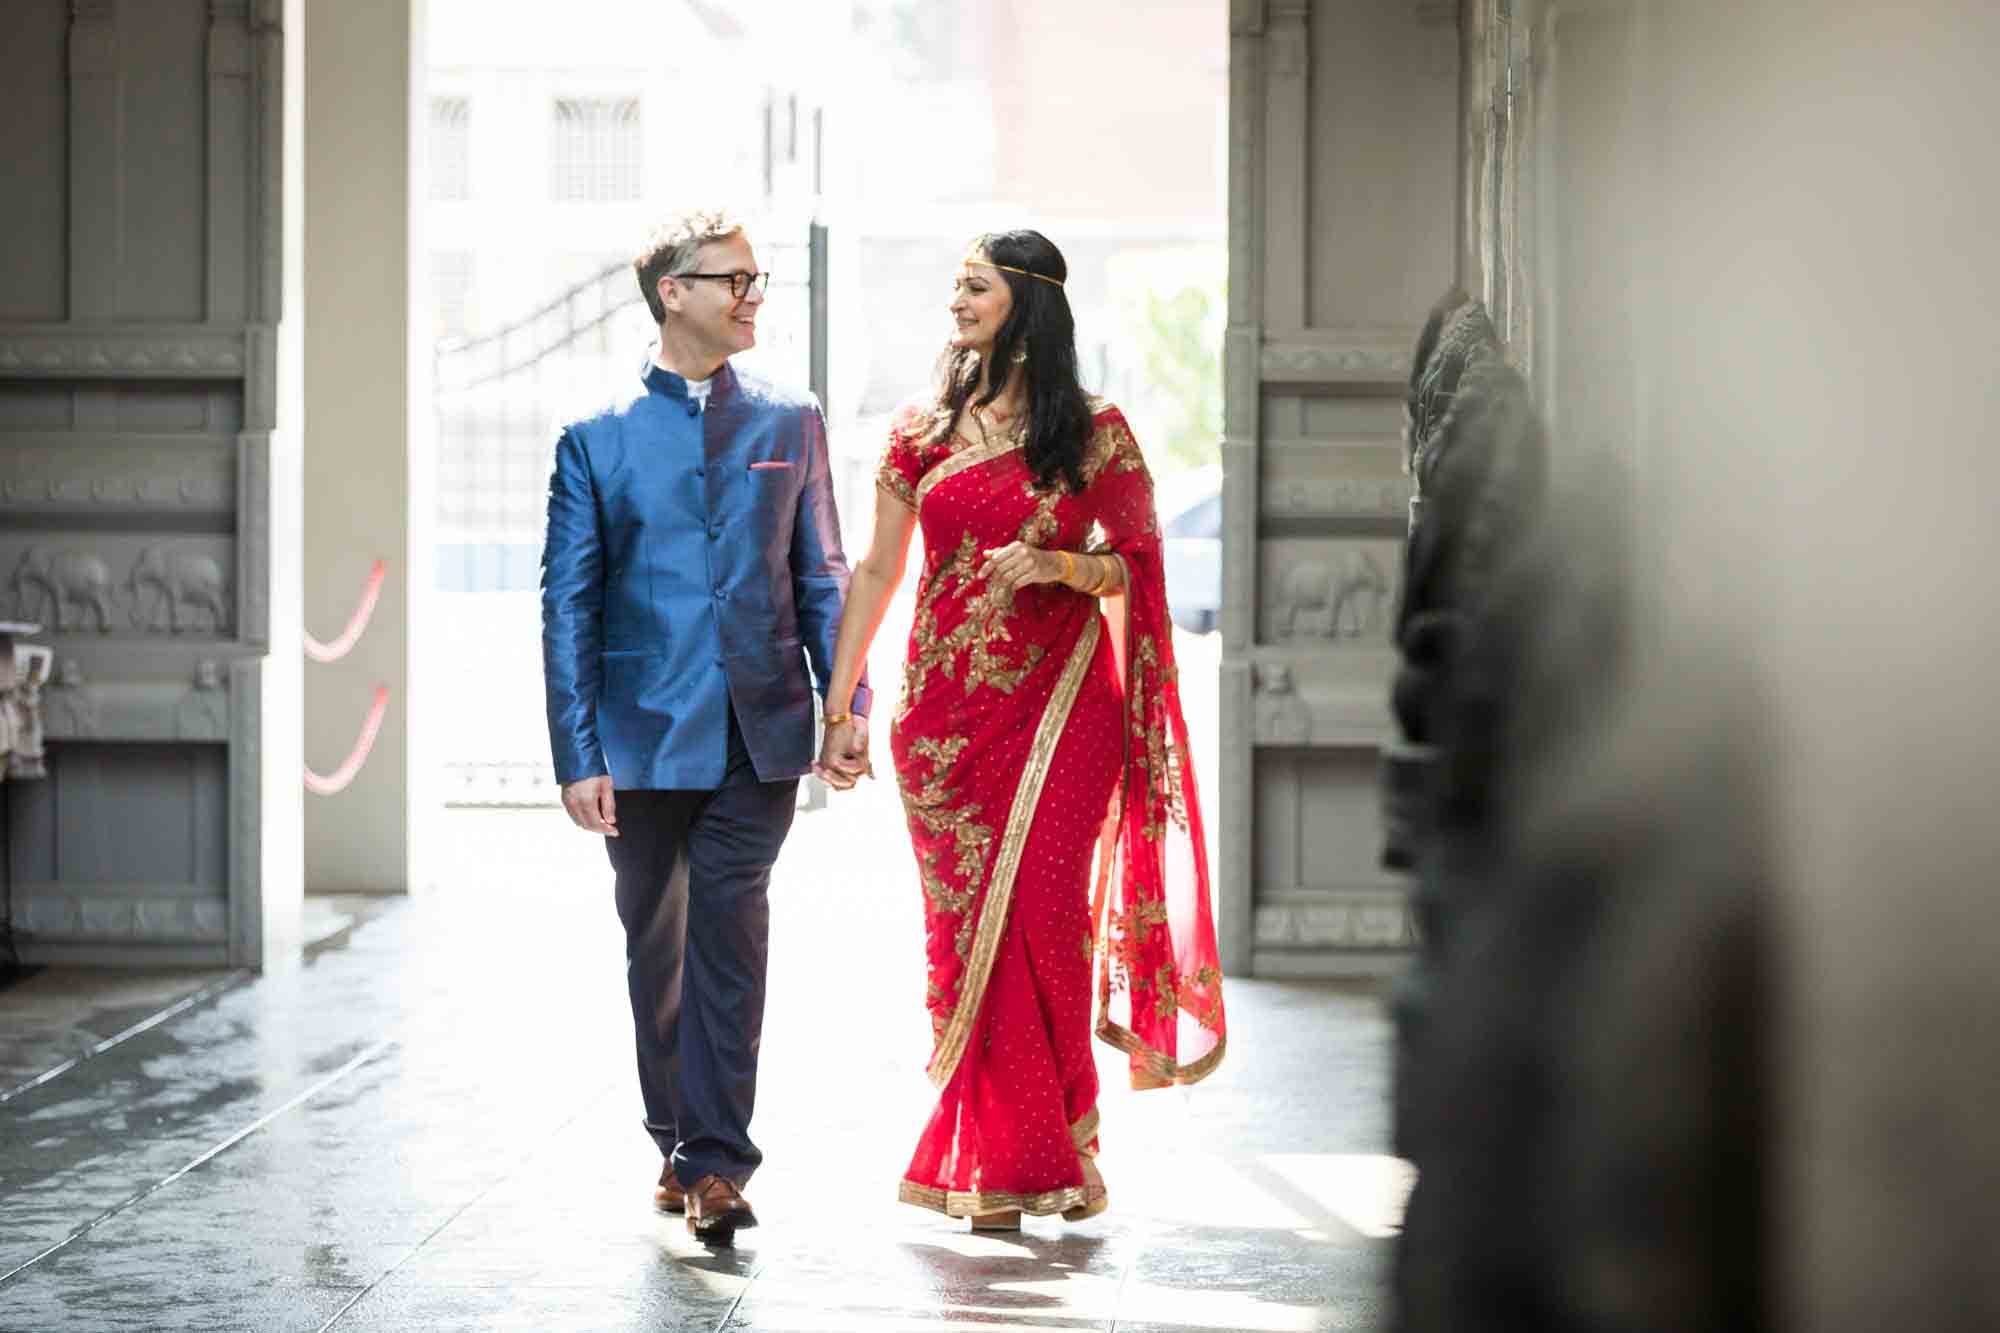 Ganesha Temple wedding photos of bride and groom holding hands and walking in main pathway